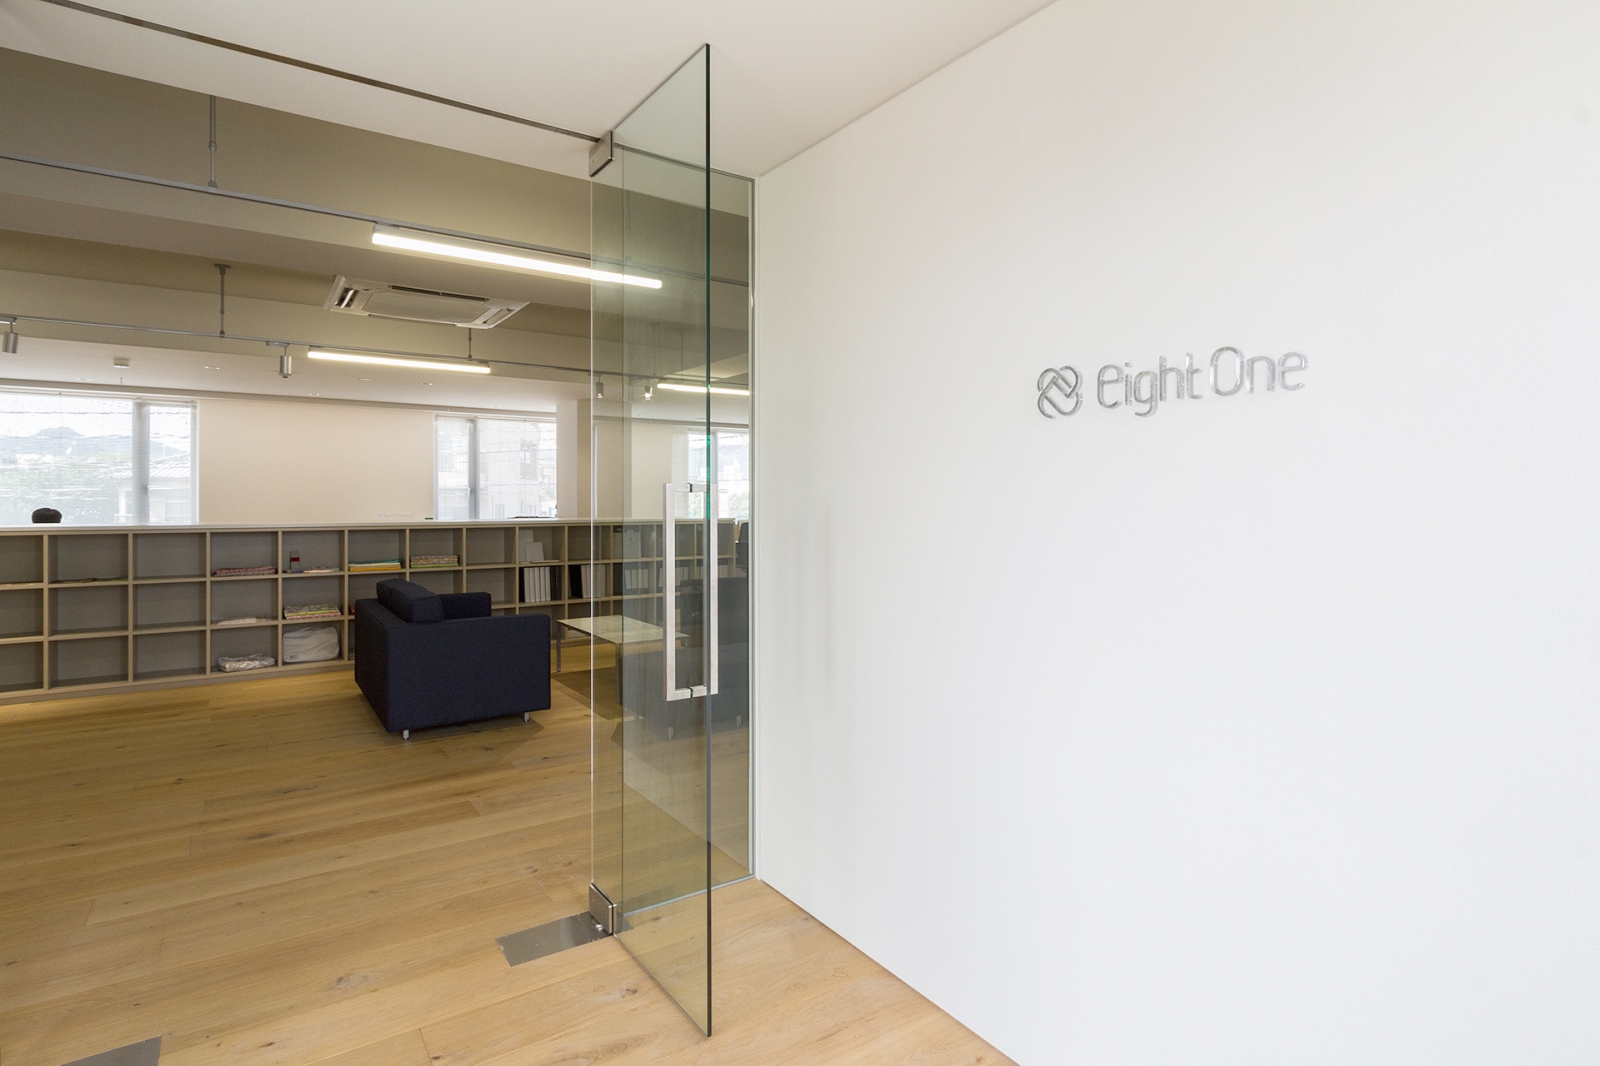 eight one co., ltd. Office-image1